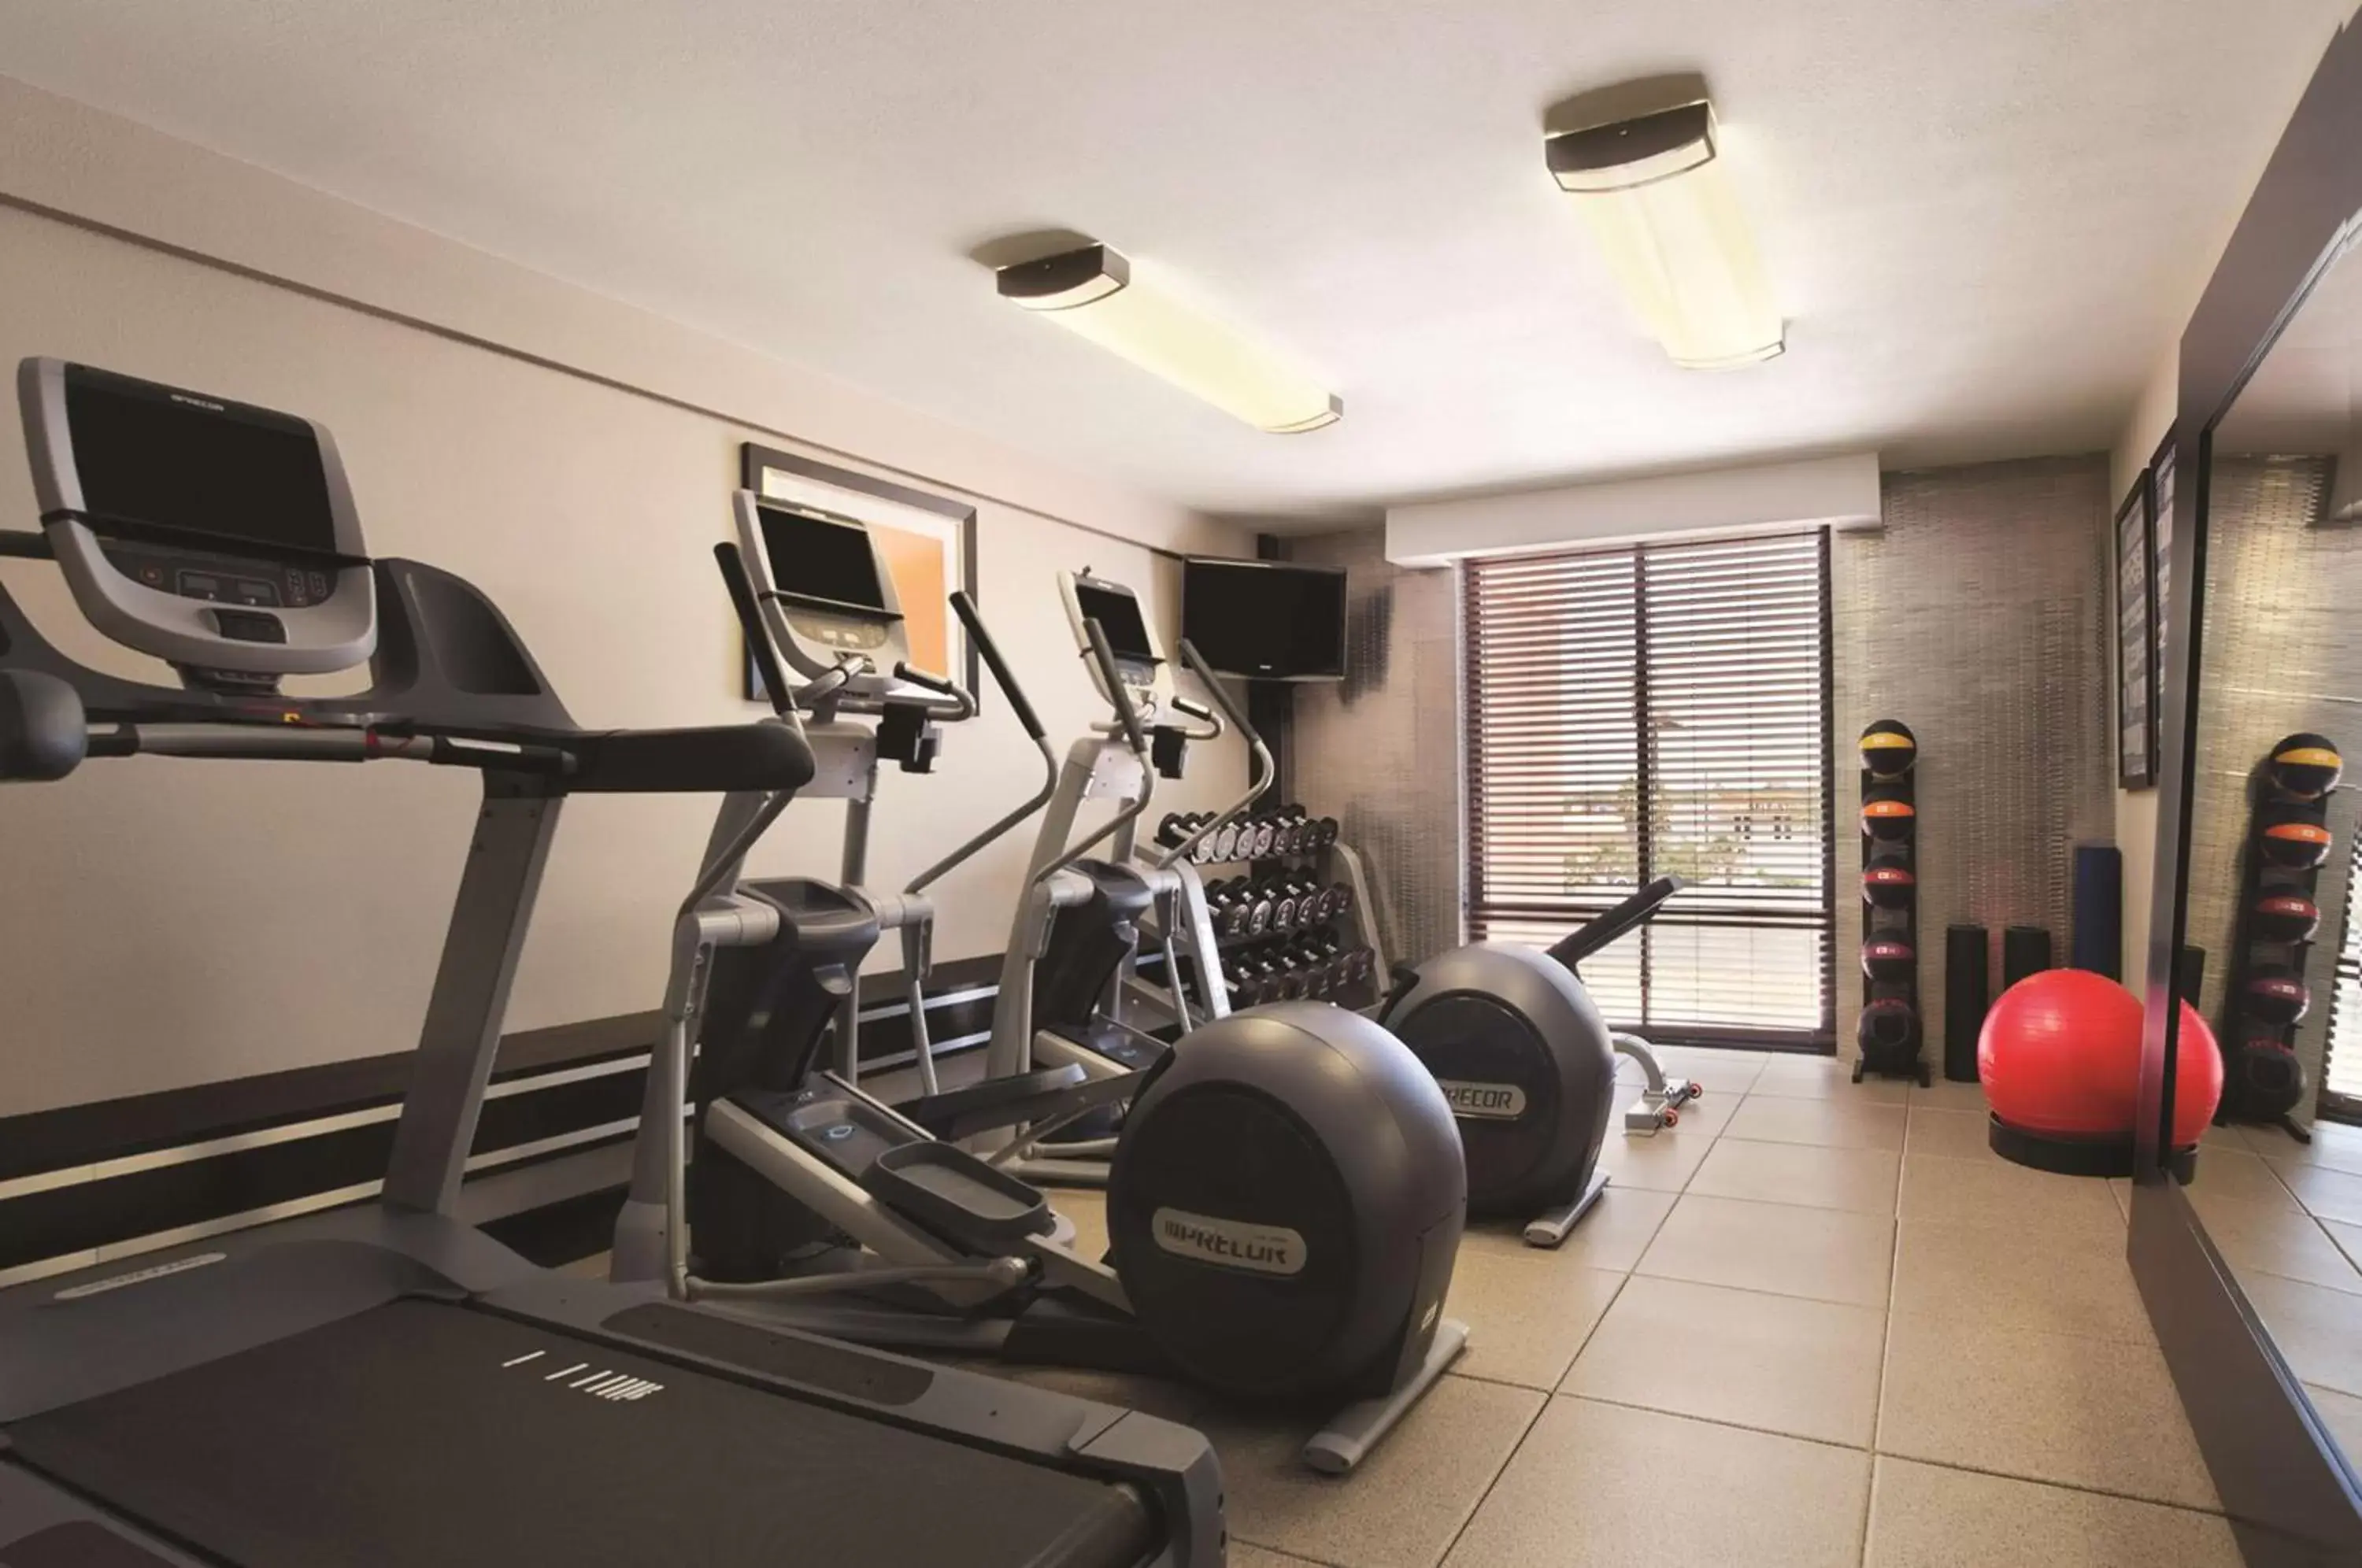 Fitness centre/facilities, Fitness Center/Facilities in Embassy Suites Corpus Christi